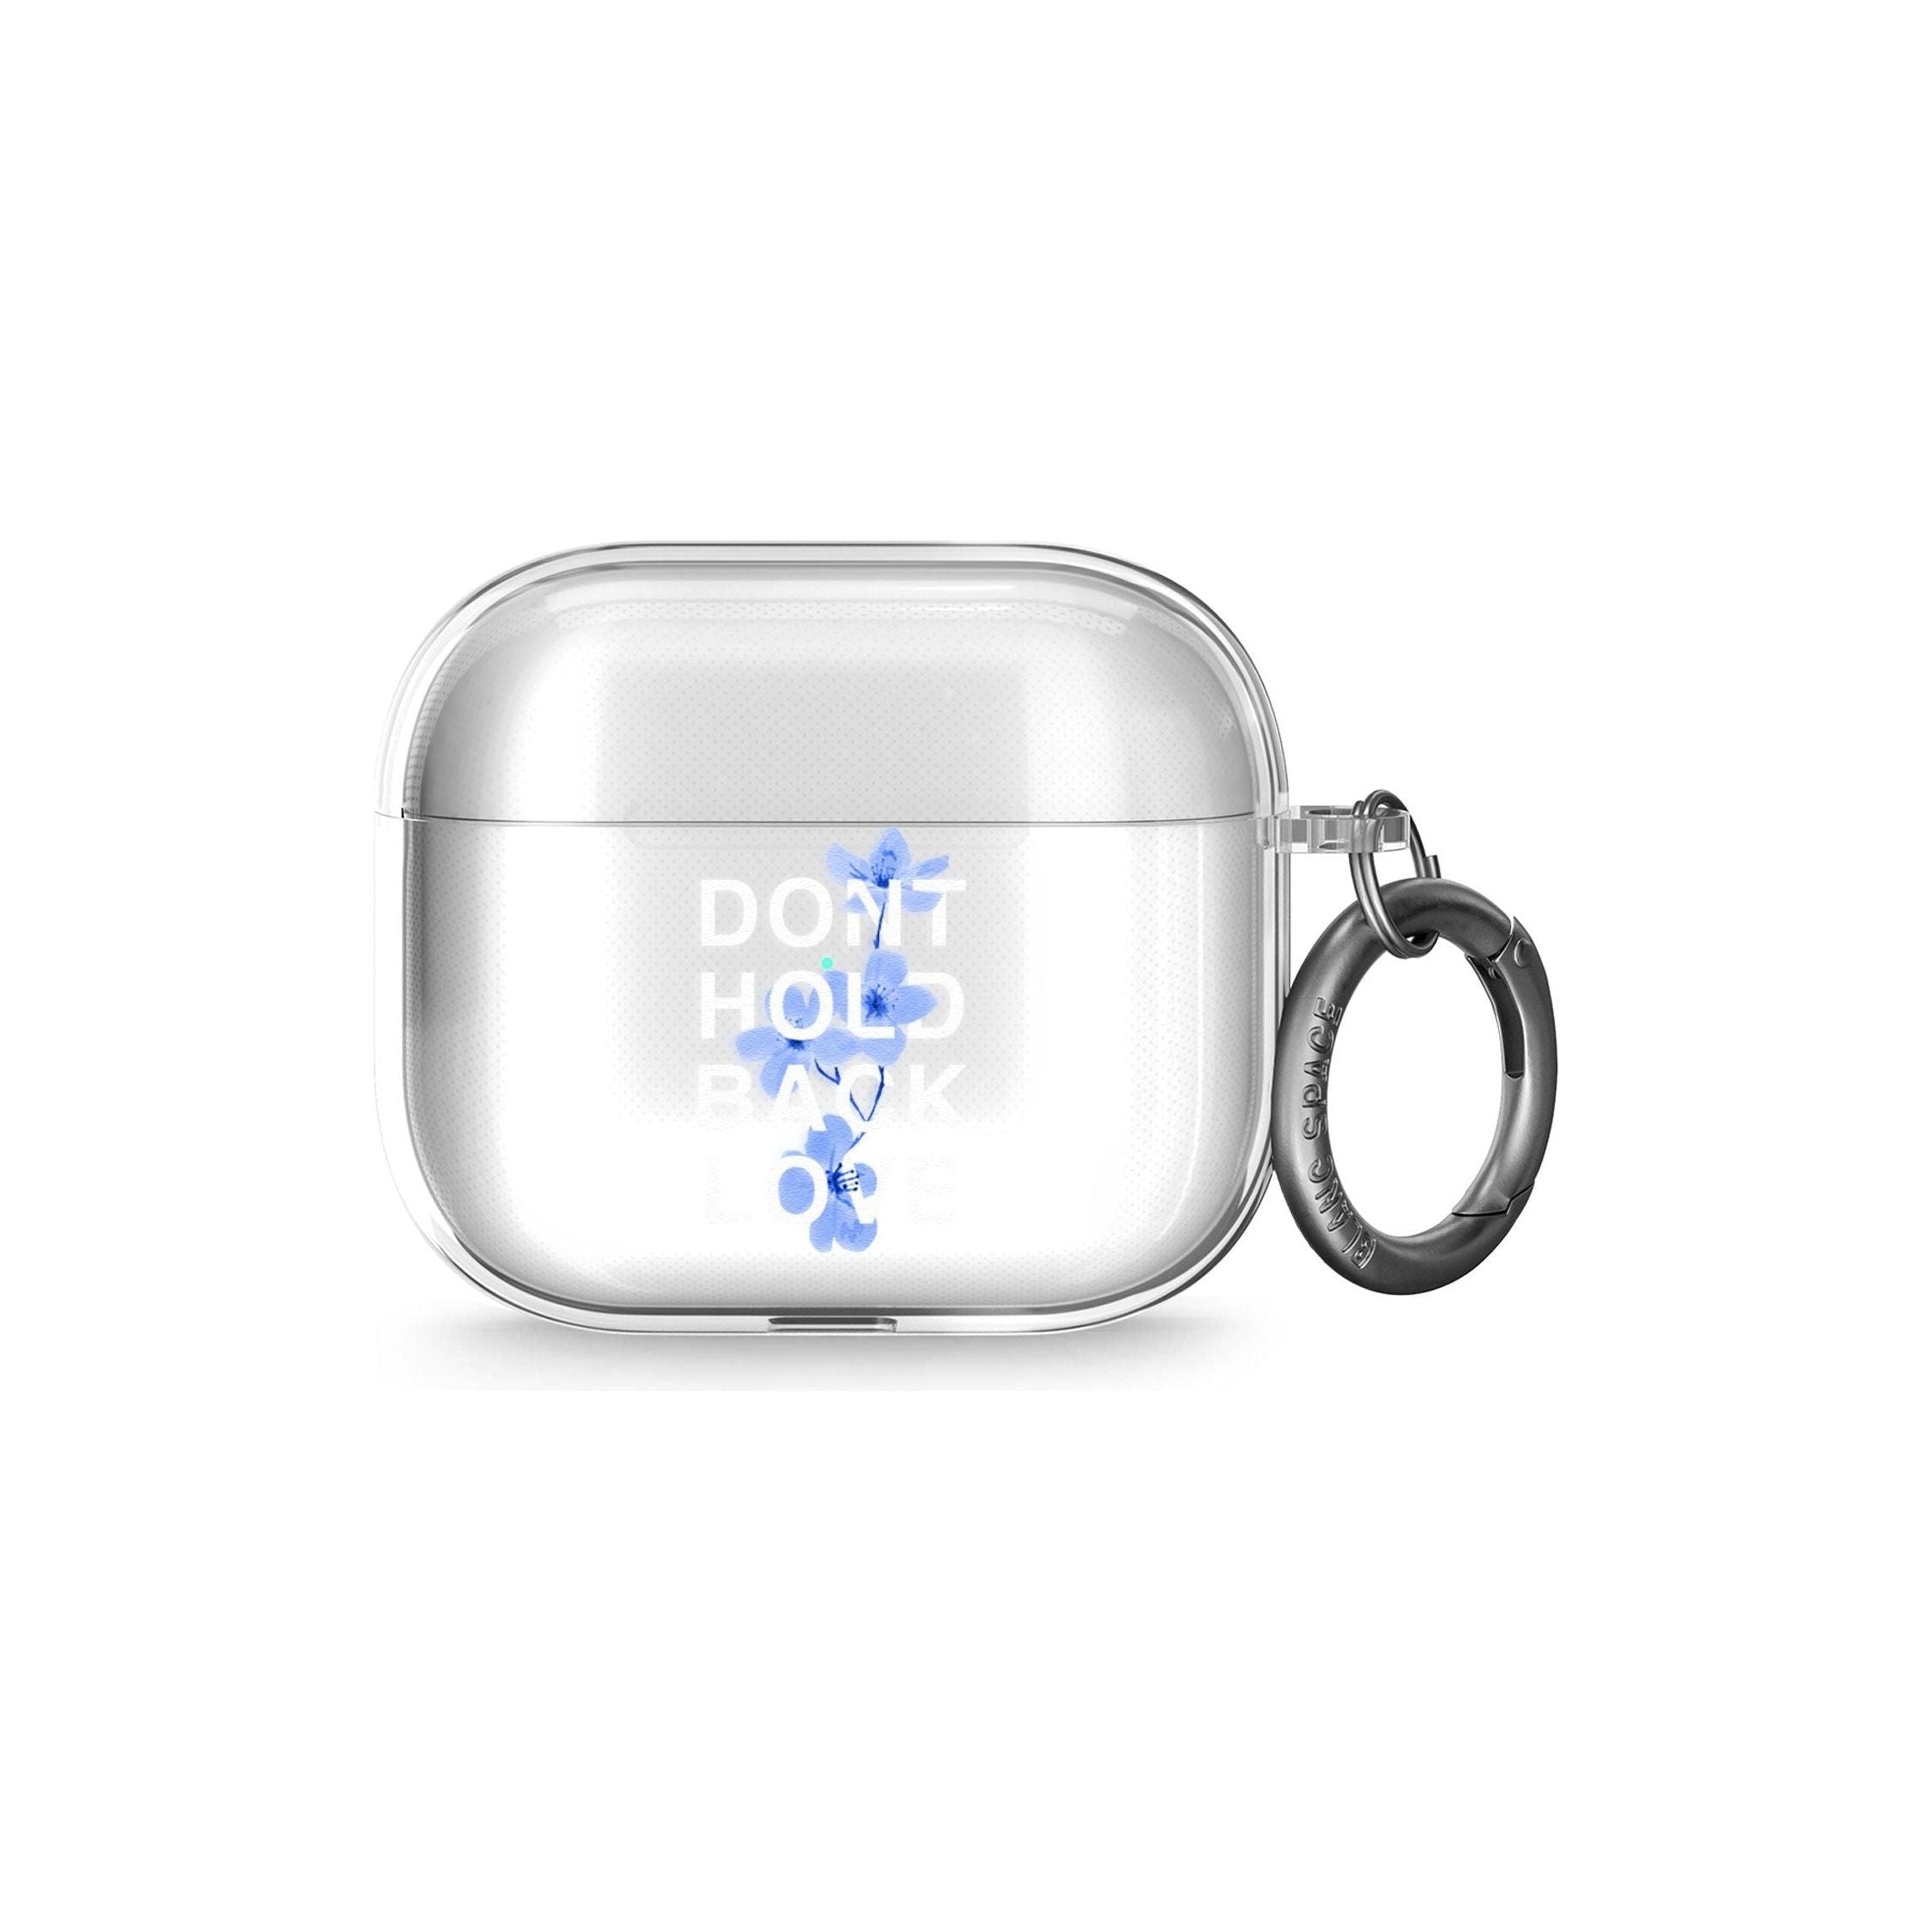 Don't Hold Back Love - Blue & White AirPods Case (3rd Generation)